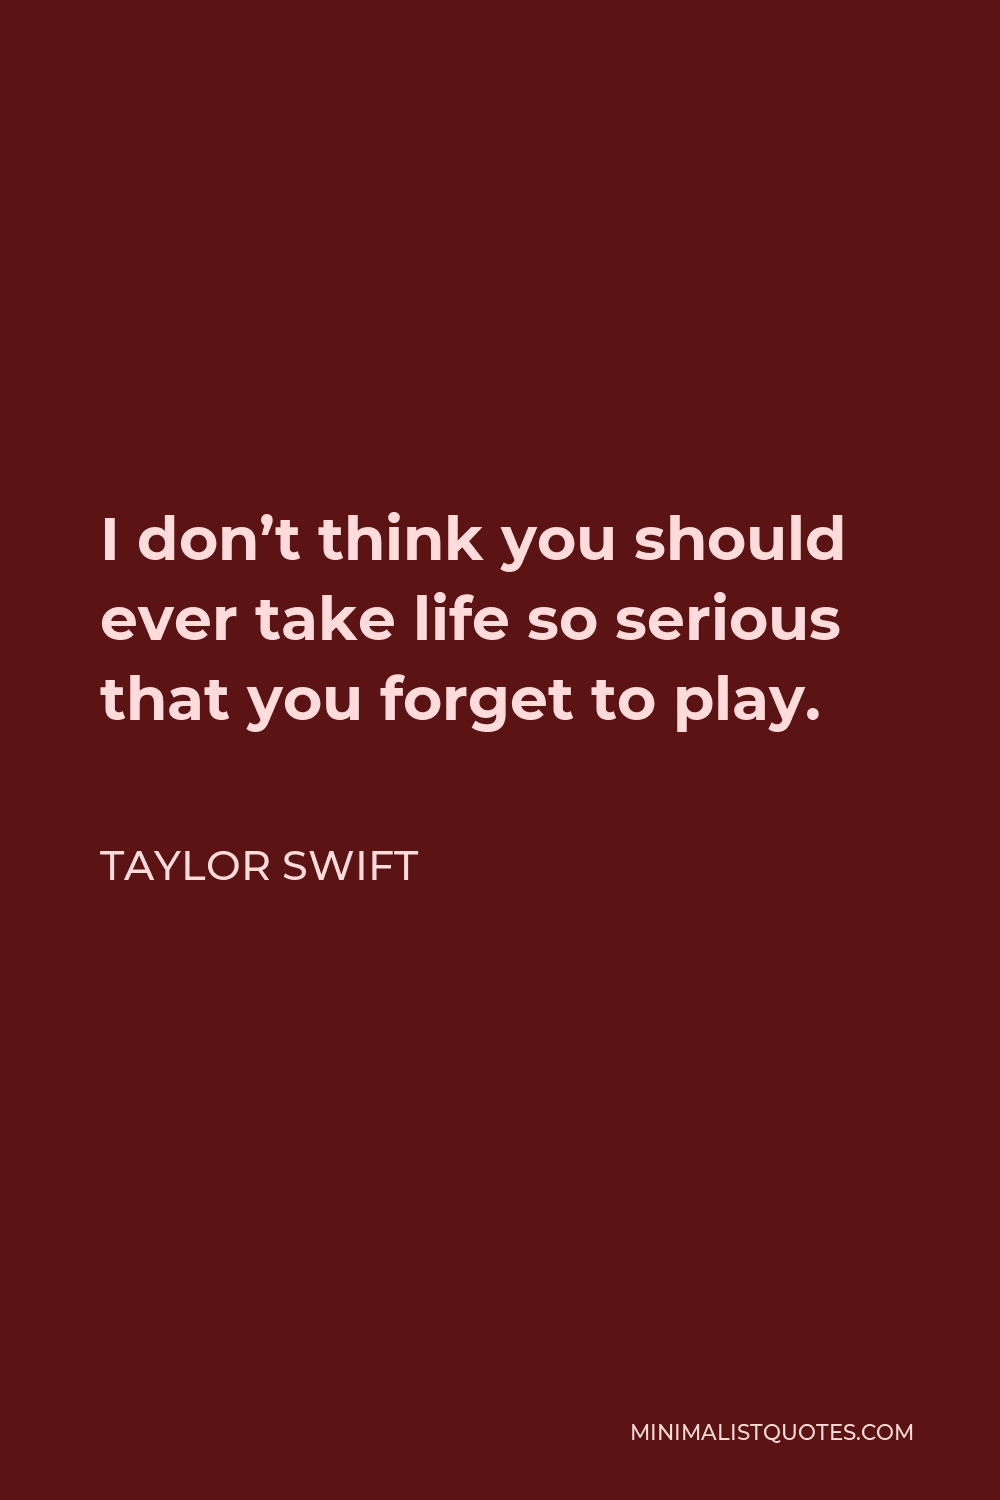 Taylor Swift Quote - I don’t think you should ever take life so serious that you forget to play.